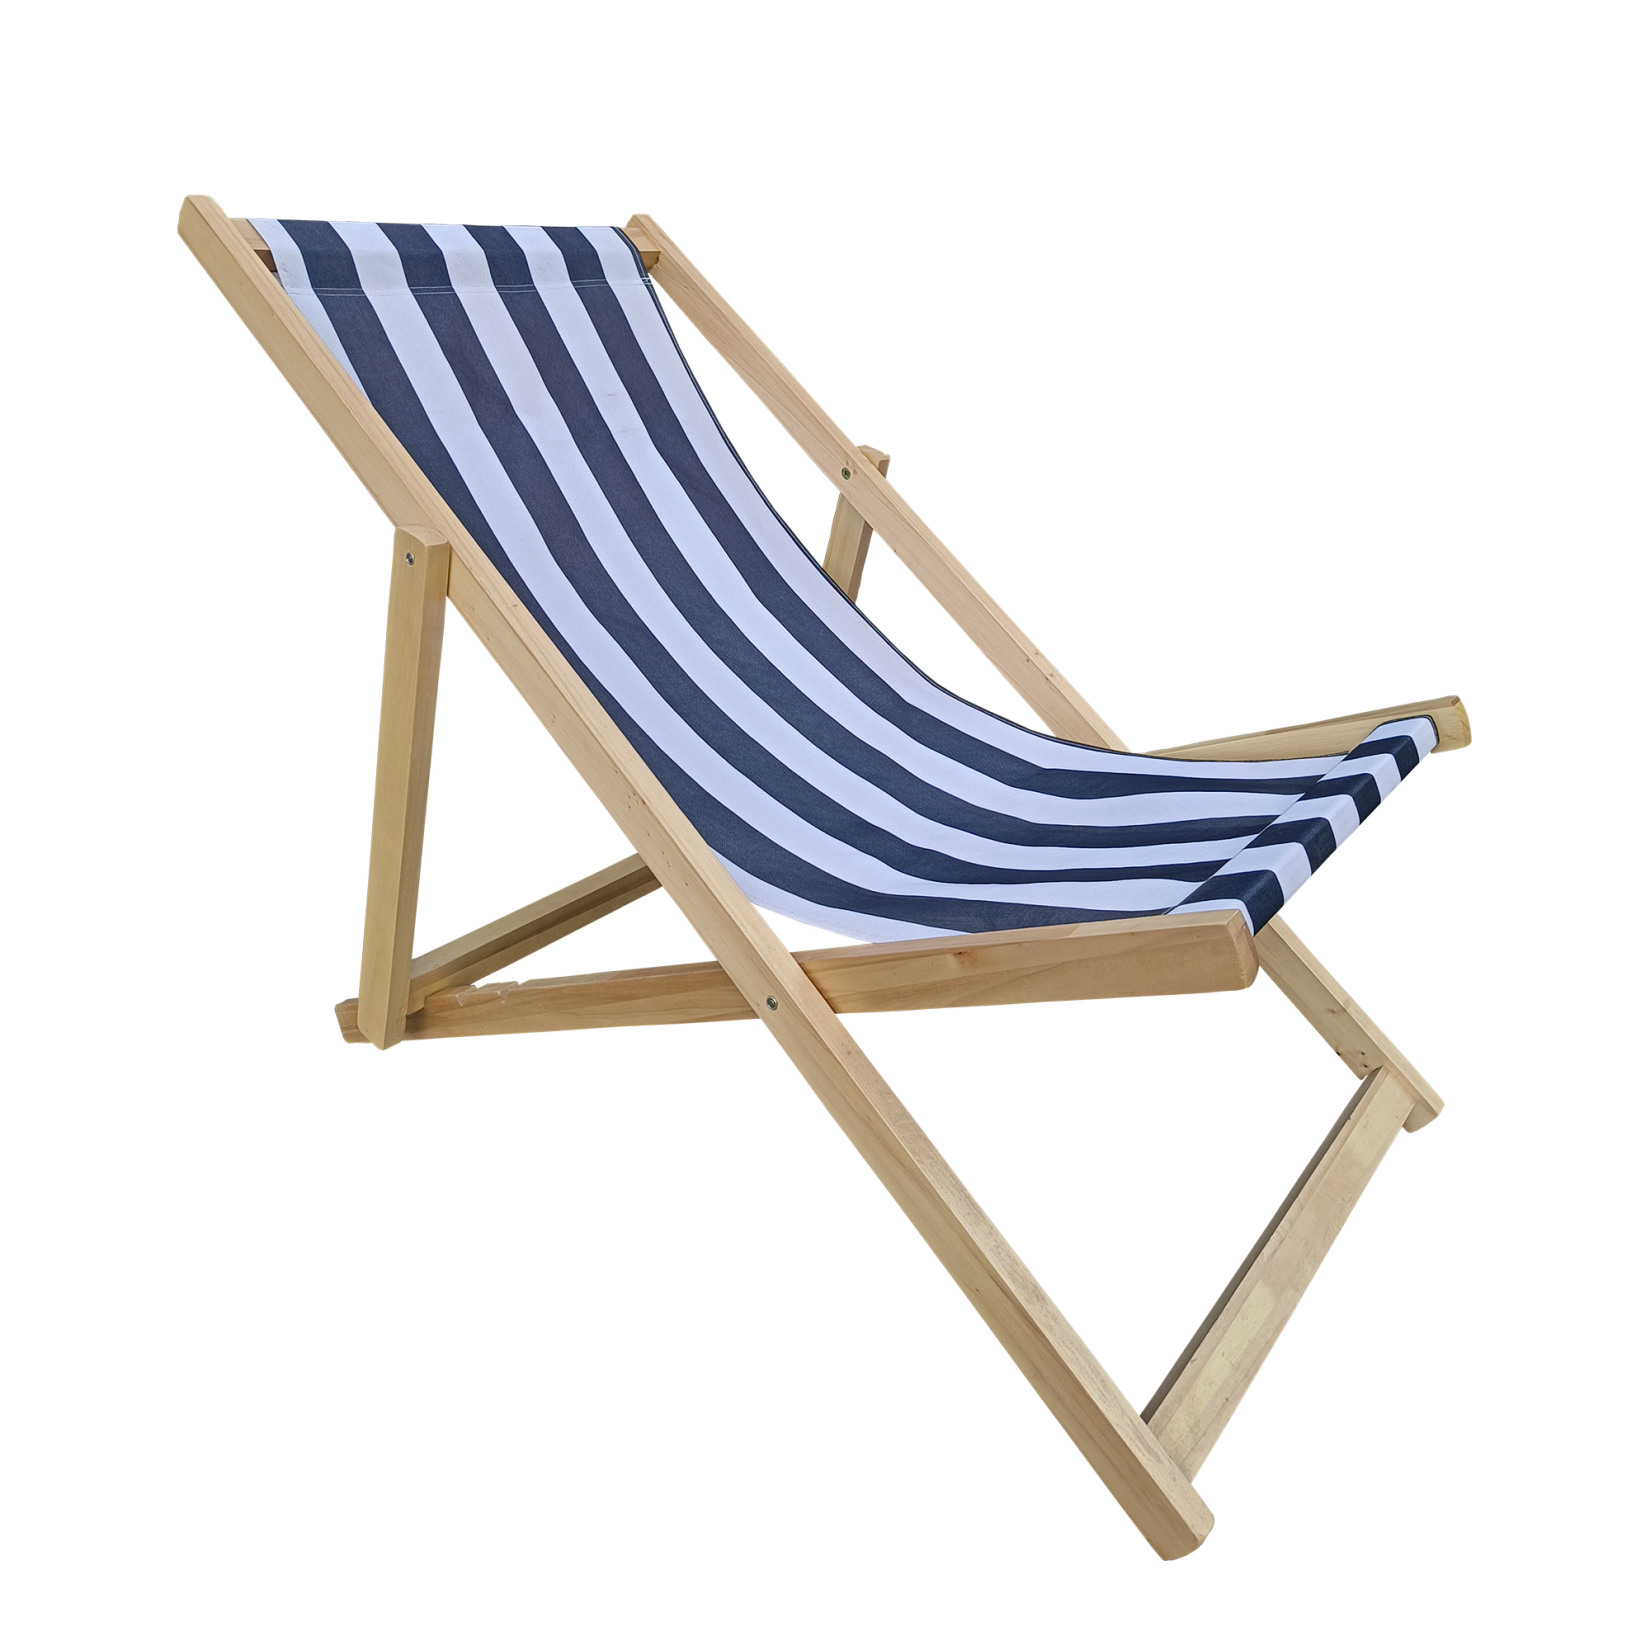 Outdoor Folding Beach Chaise Lounge Chair Camping Recliner, Sling Chair Beach Recliner, Beach Chair with Adjustable Back, Pool Chair Outdoor Chair Garden Chair, Portable Chair - image 3 of 8